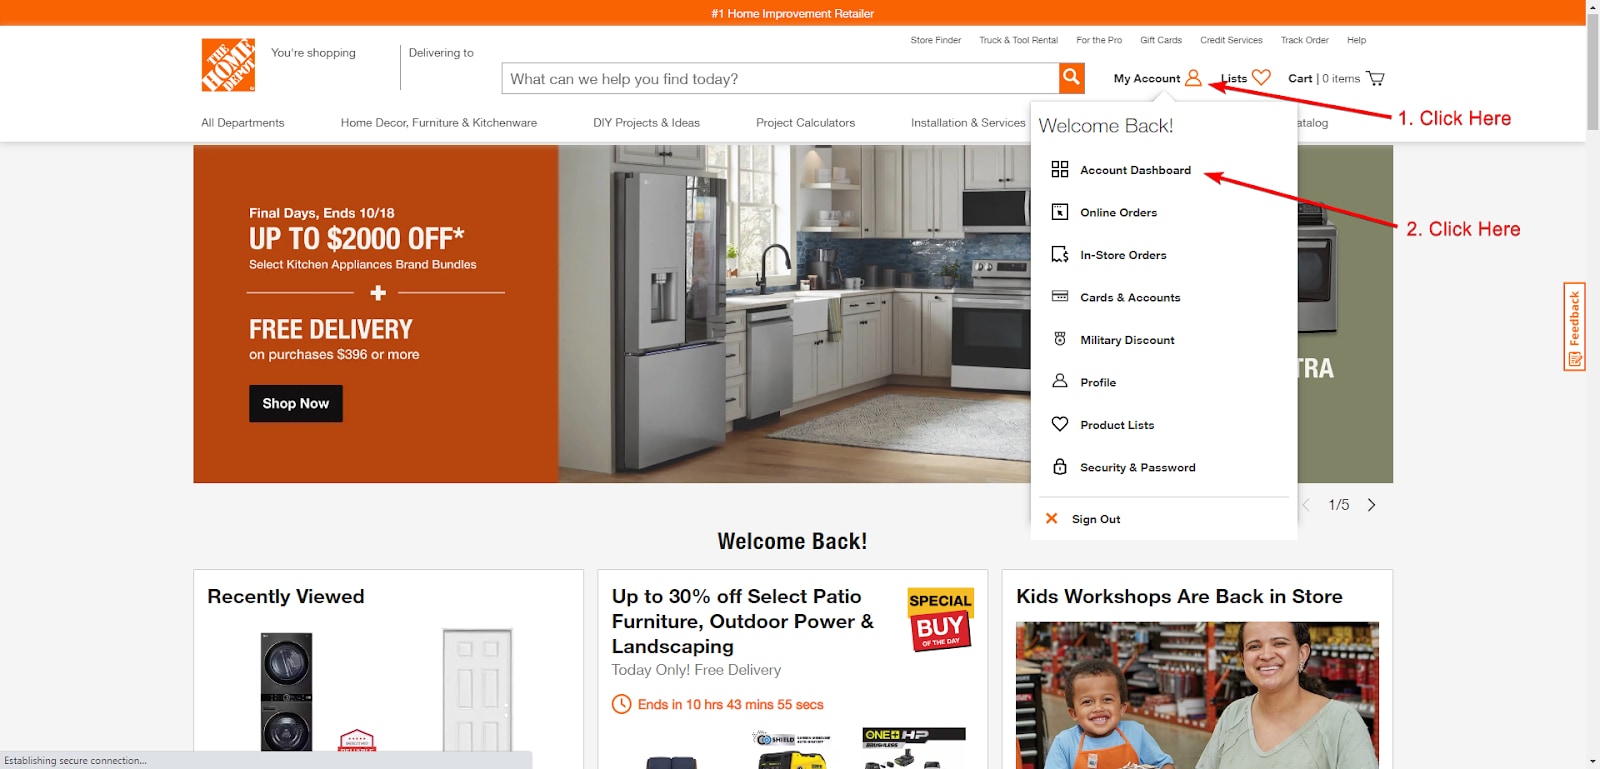 Home Depot Member Home Page